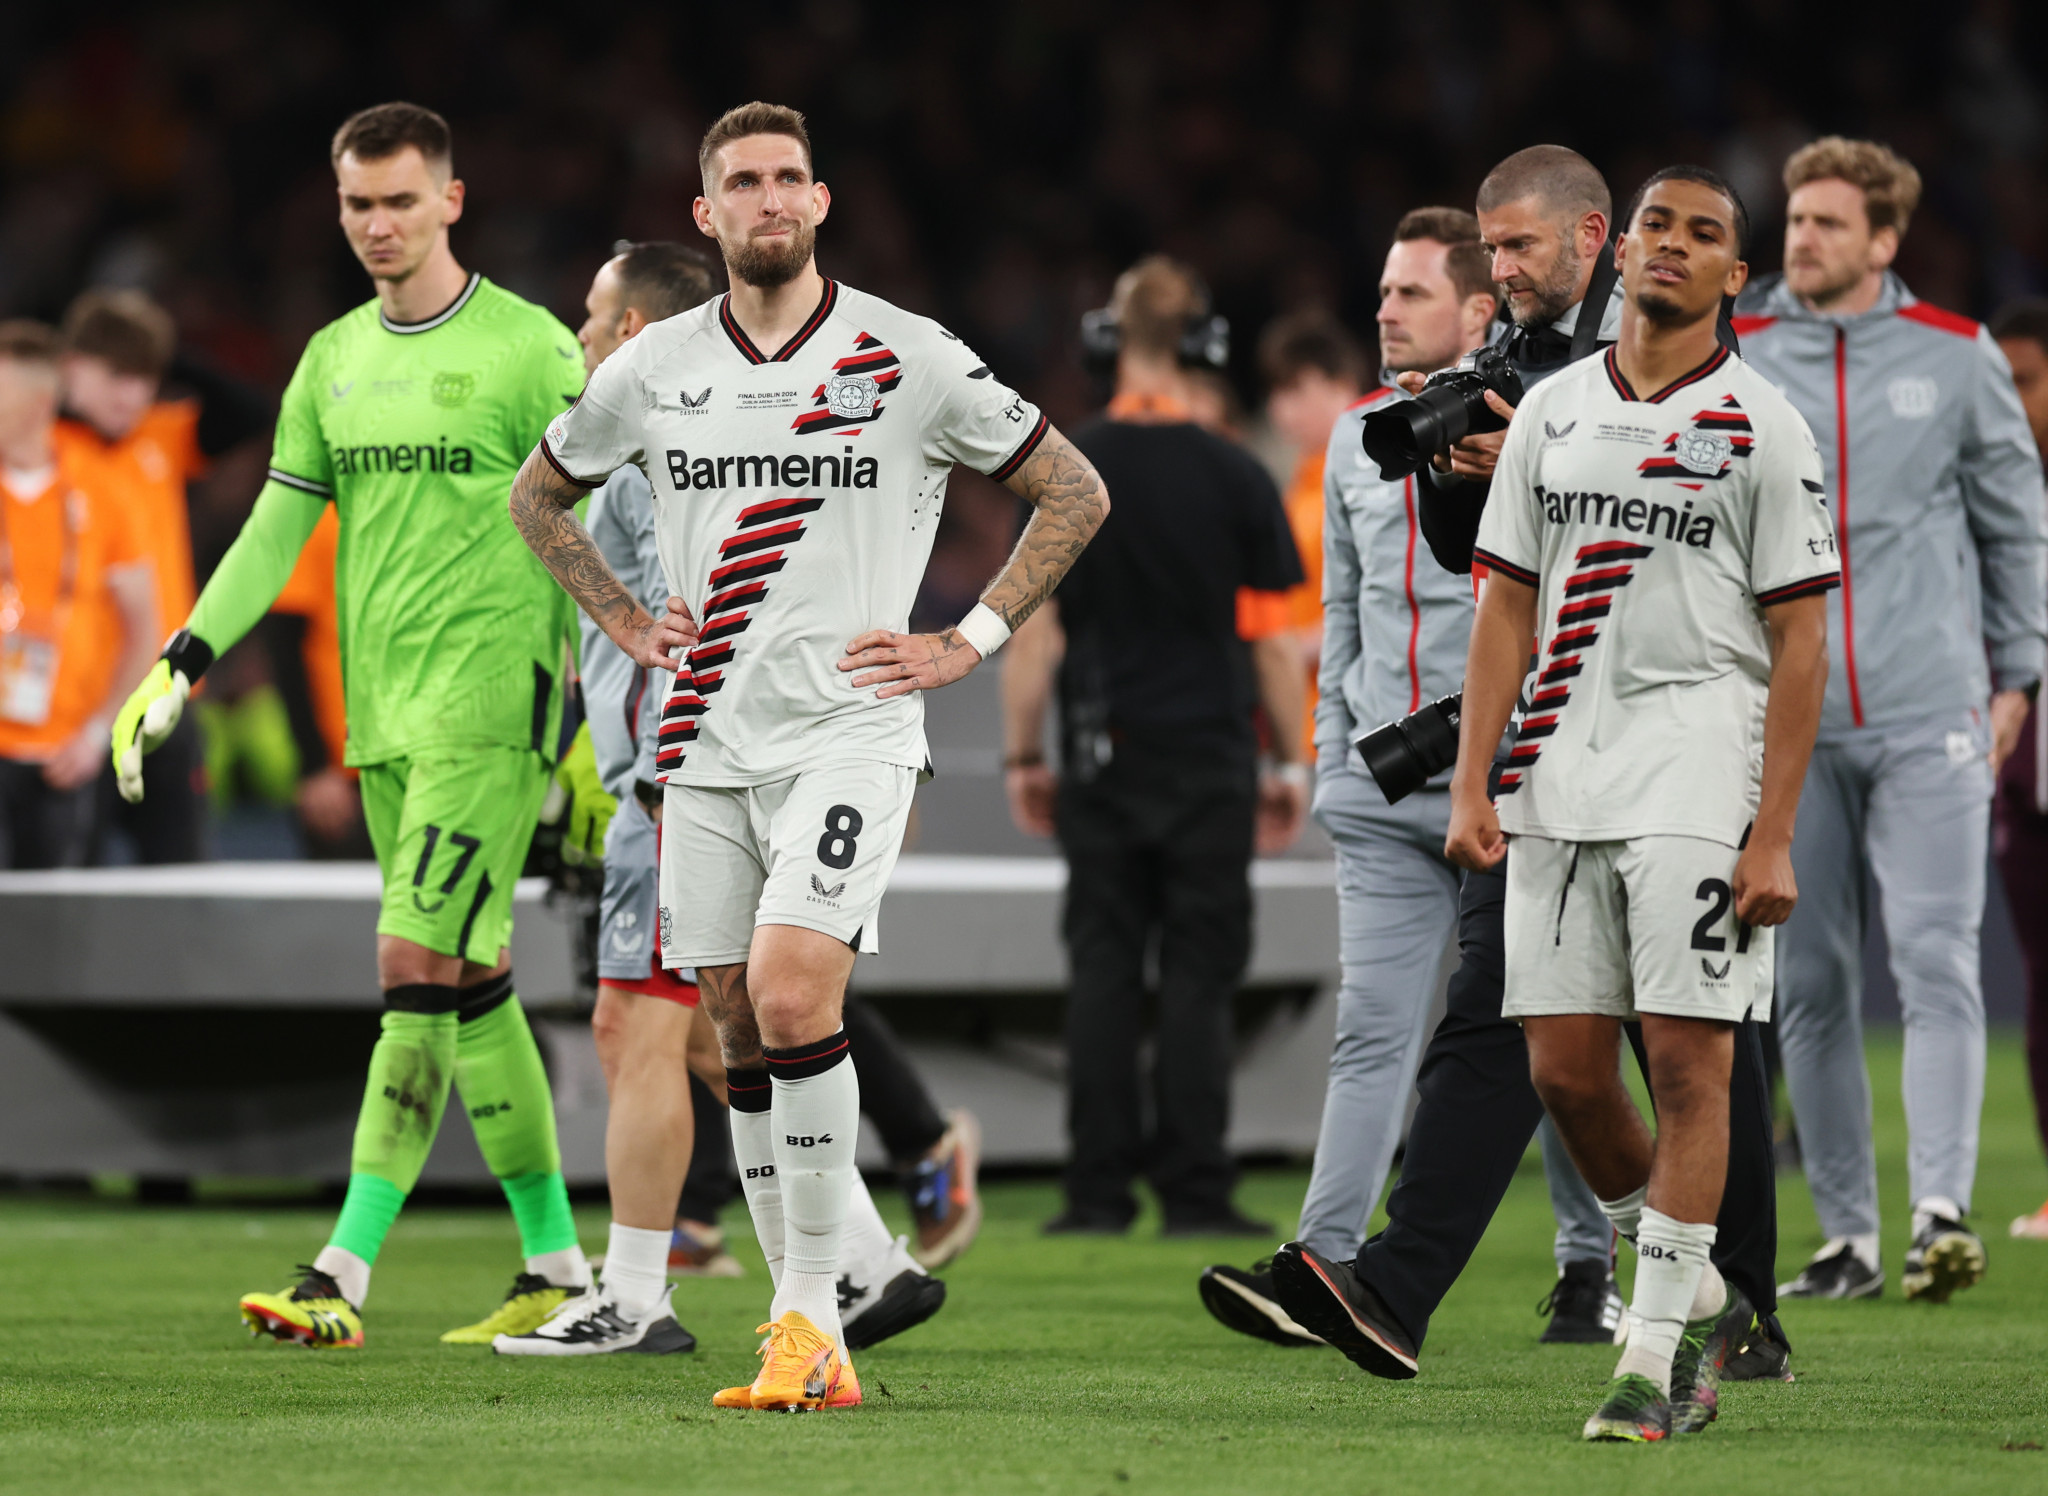 Bayer Leverkusen's remarkable run came to an end after defeat to Atalanta. GETTY IMAGES